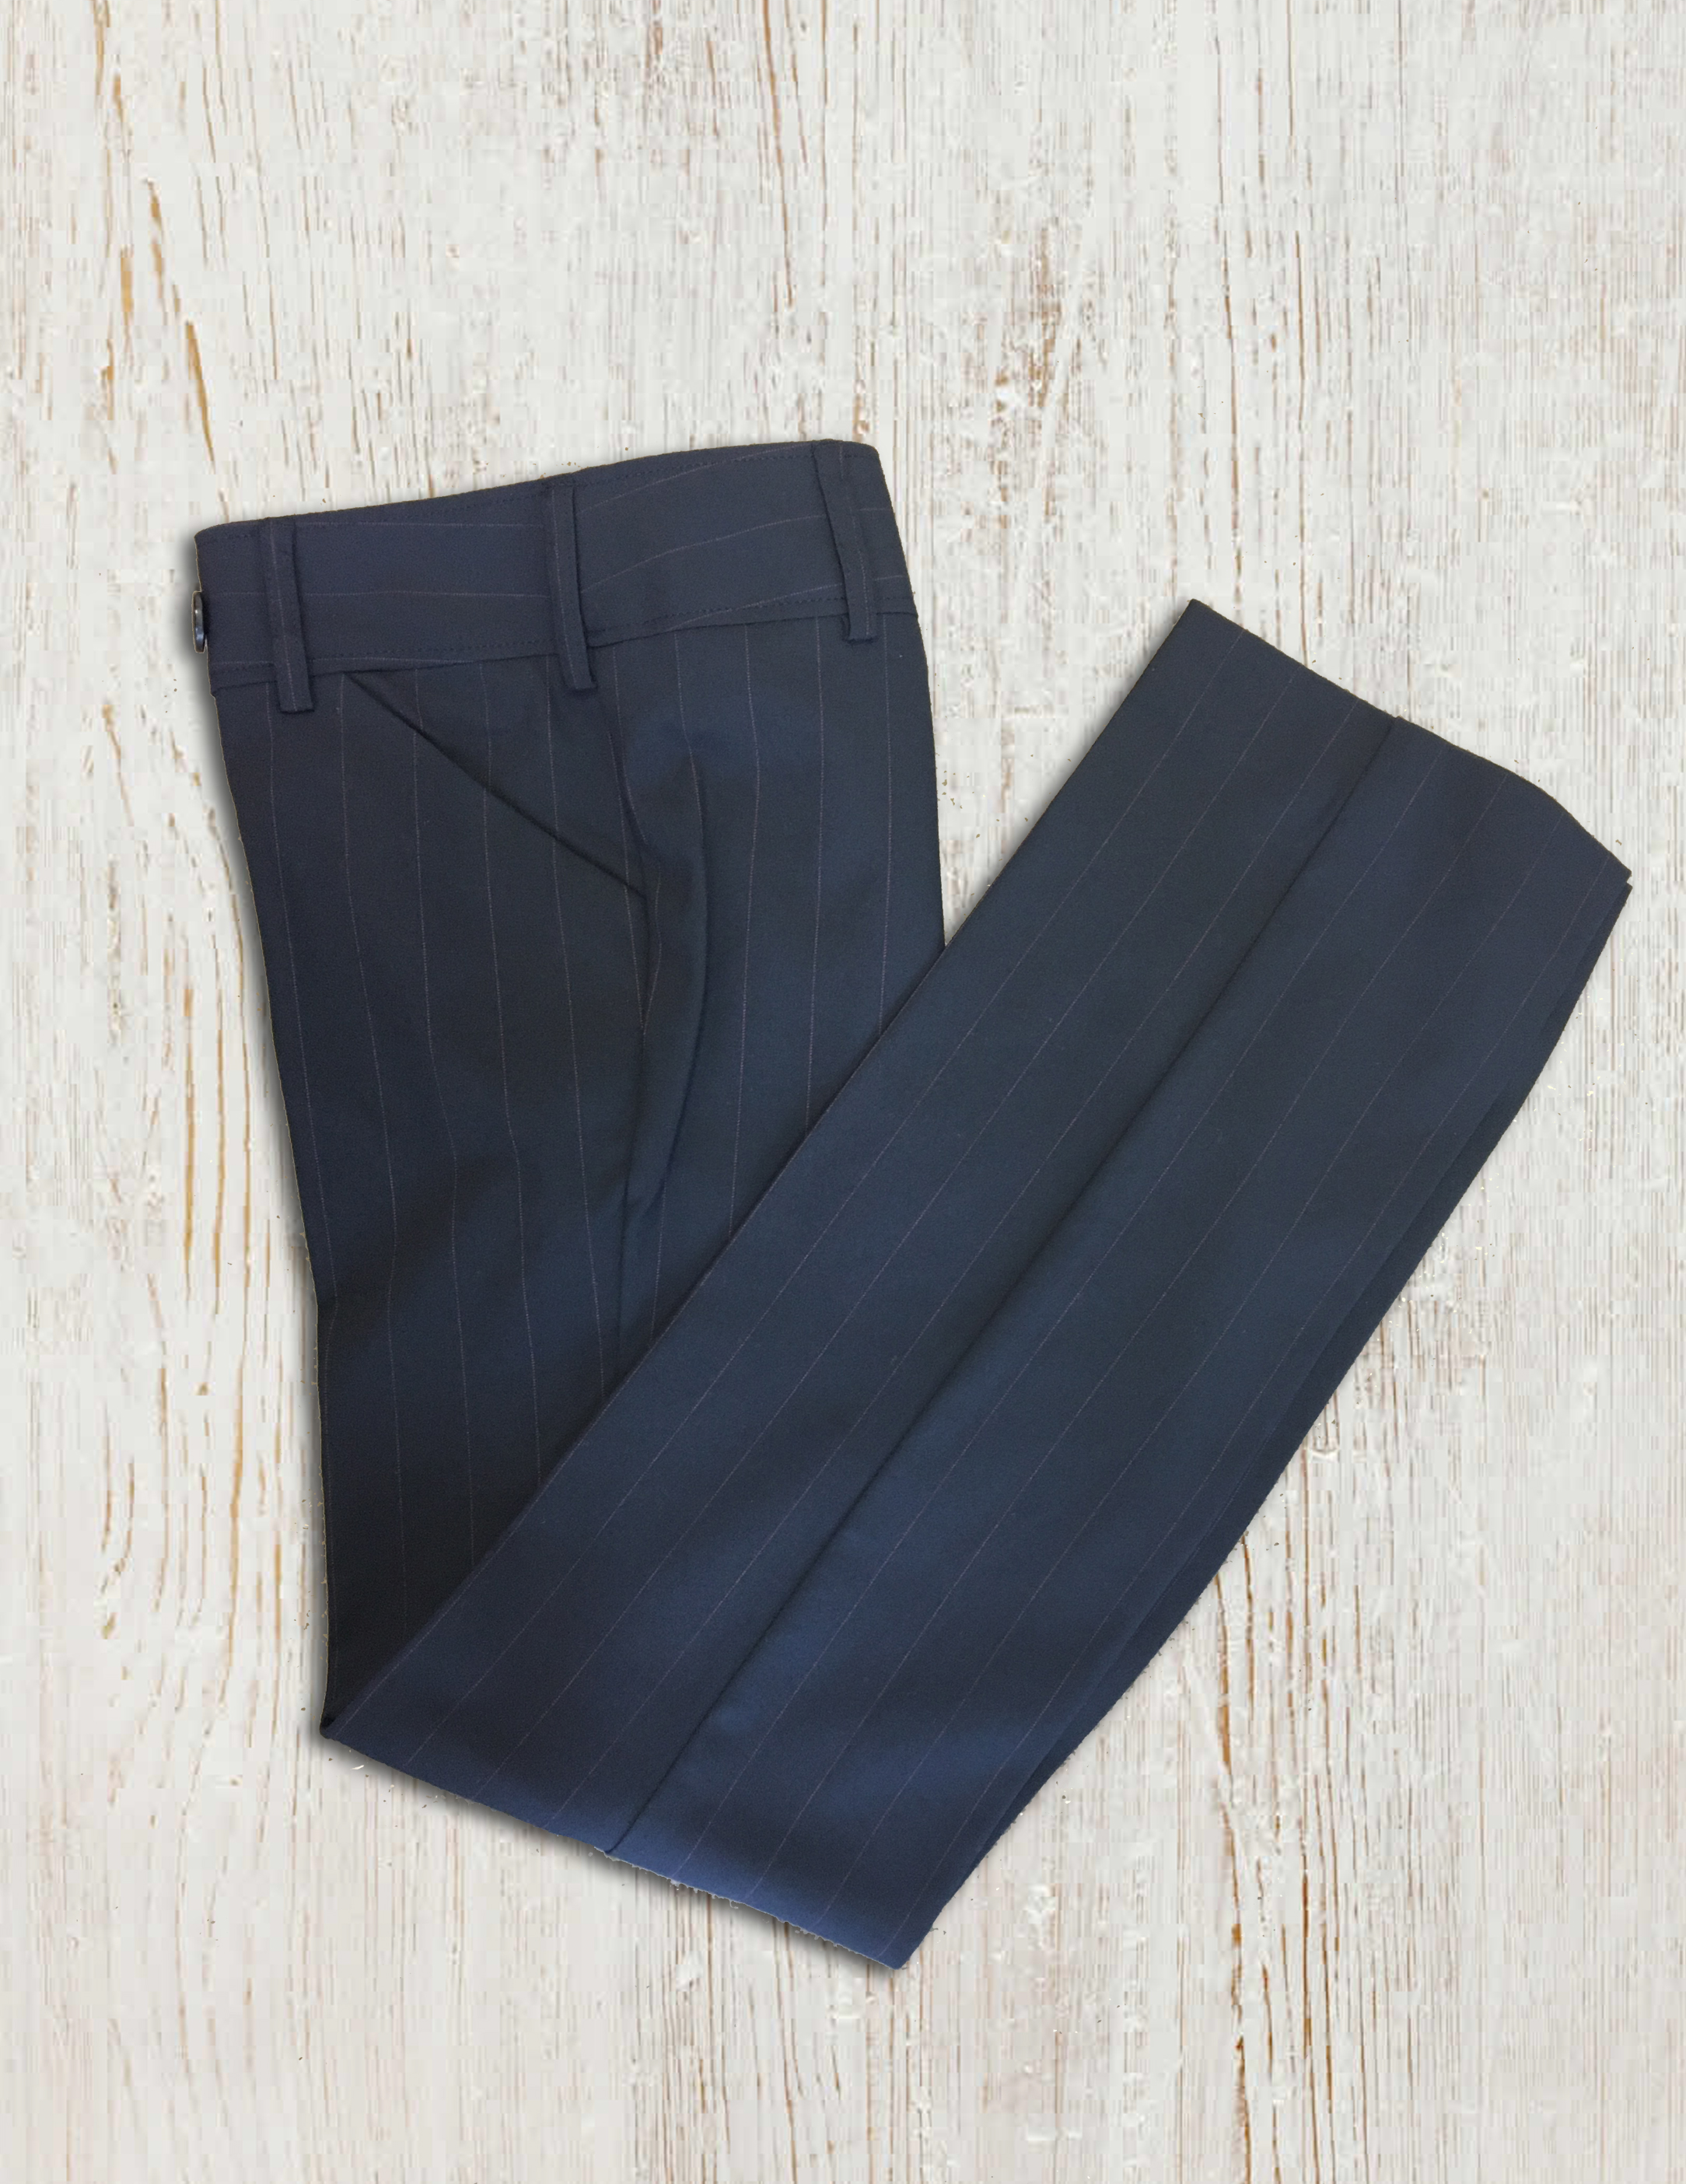 New Pinstripe Navy/Wine Trousers (000)The Schoolwear Centre